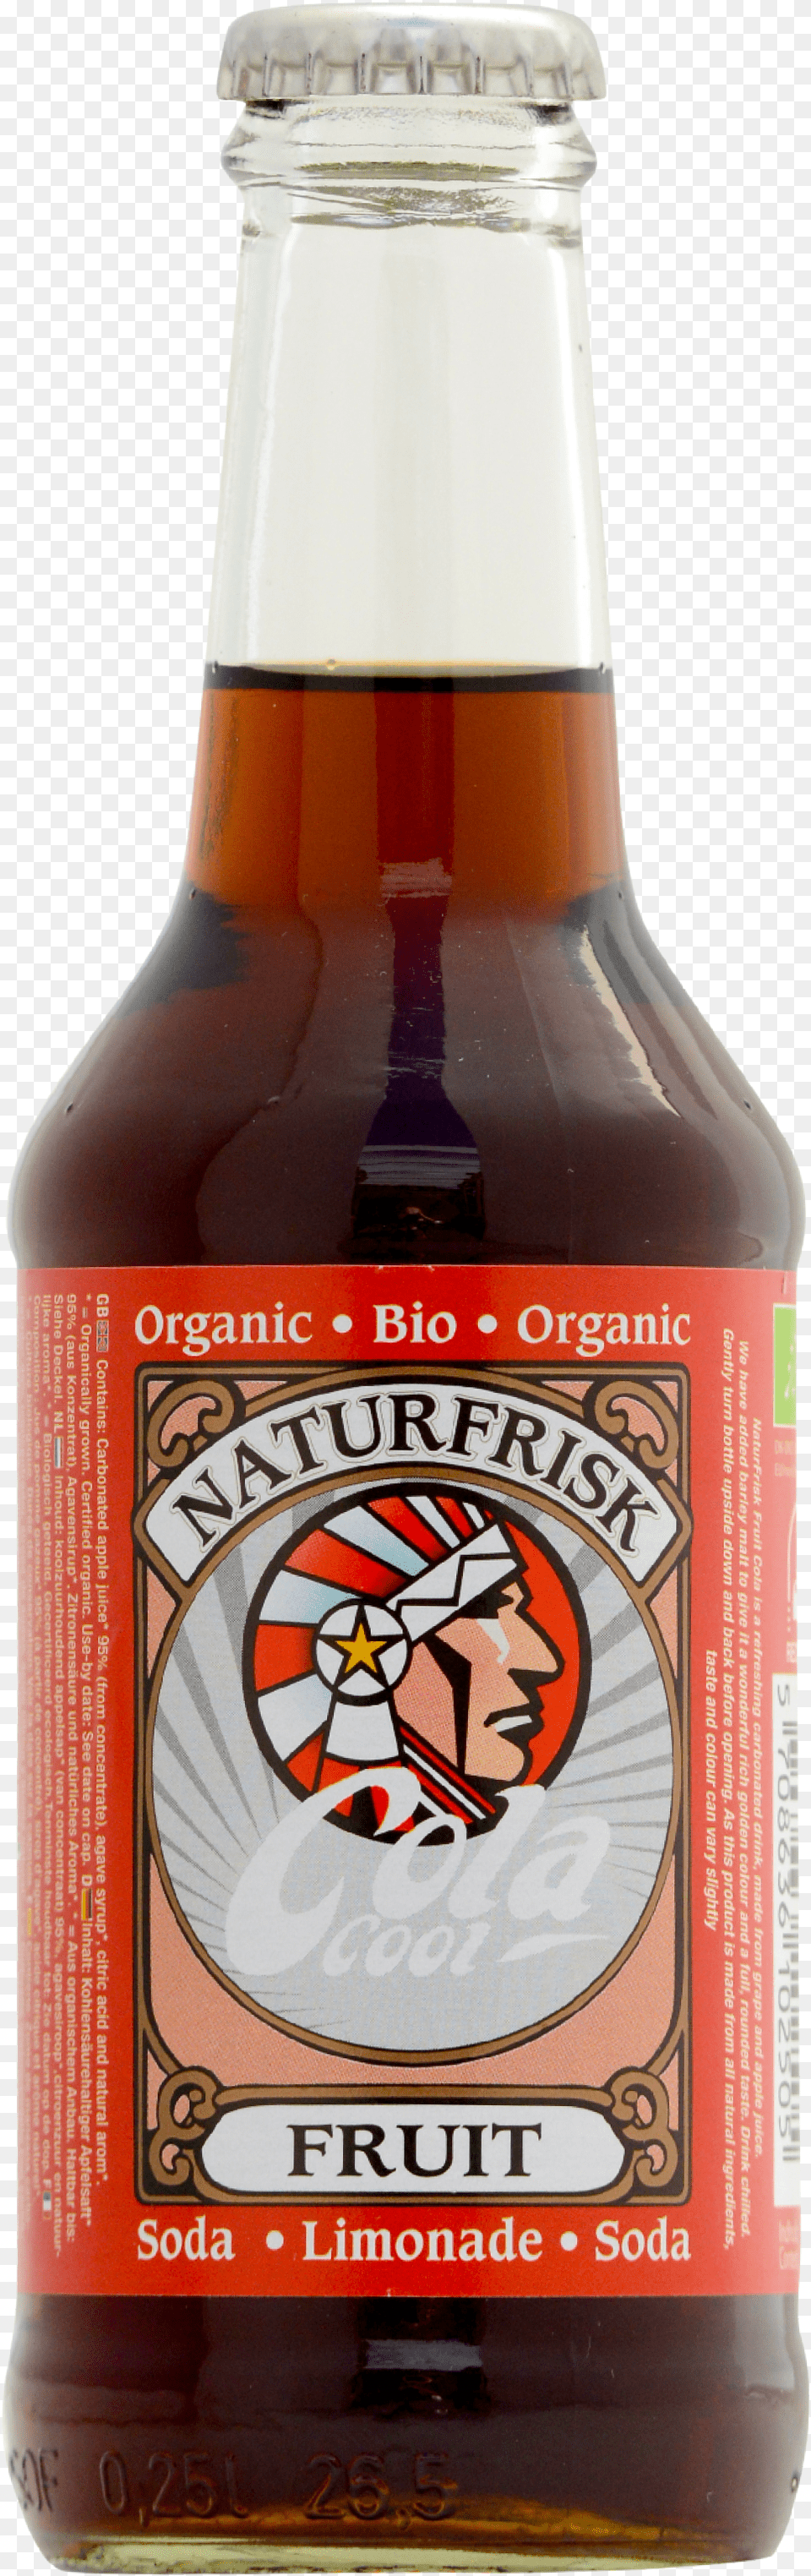 Naturfrisk Beer Bottle, Bus Stop, Outdoors, Face, Head Free Png